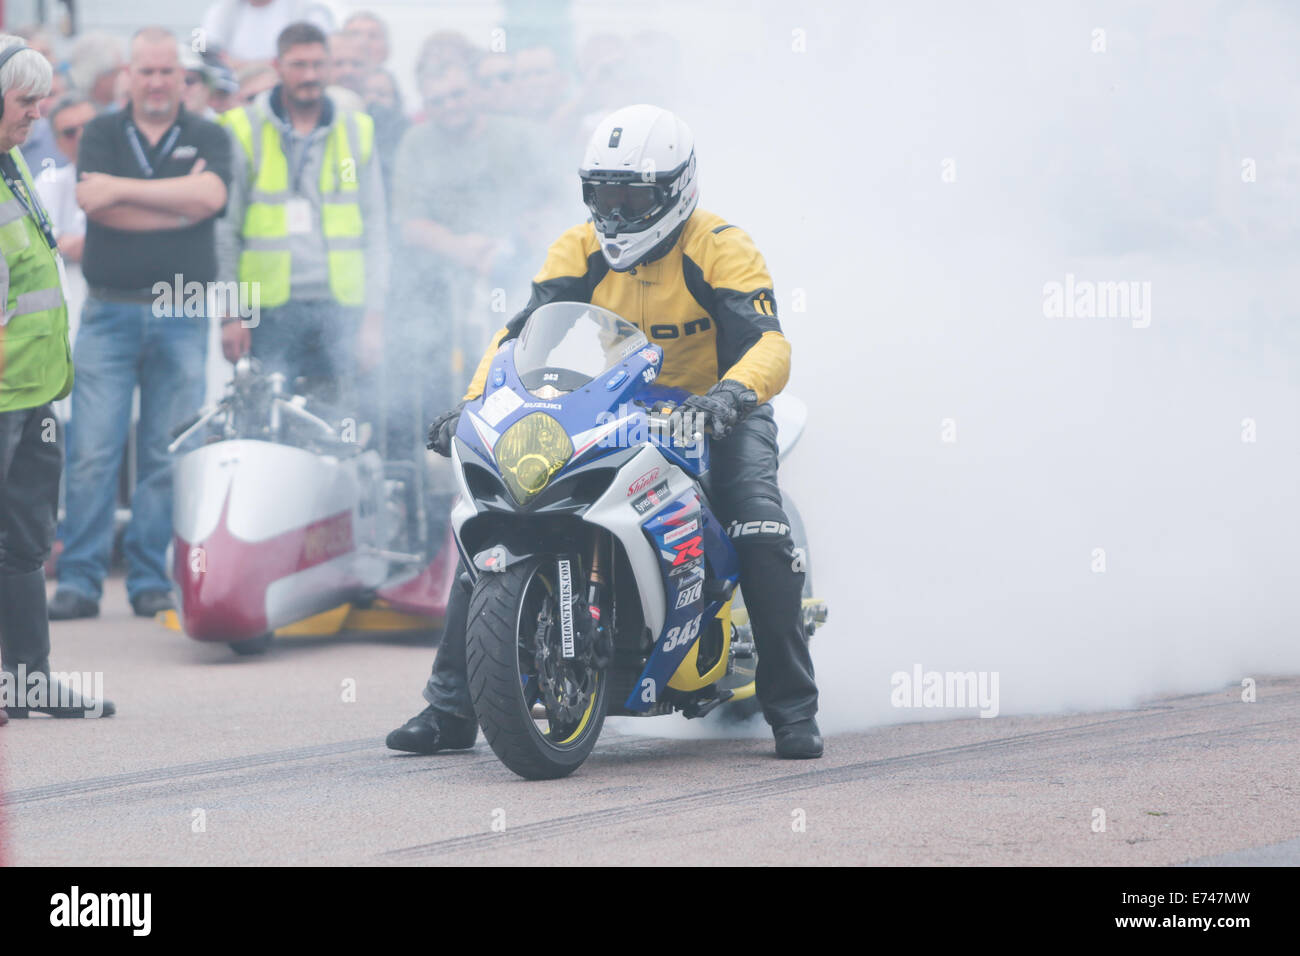 This is Paul Furlong riding a Suzuki GSXR 1000 K7 at the Brighton National Speed Trials organised by the Brighton & Hove Motor Club held annually at Madeira Drive, Brighton Seafront, Brighton, East Sussex, UK. 6th September 2014 Stock Photo